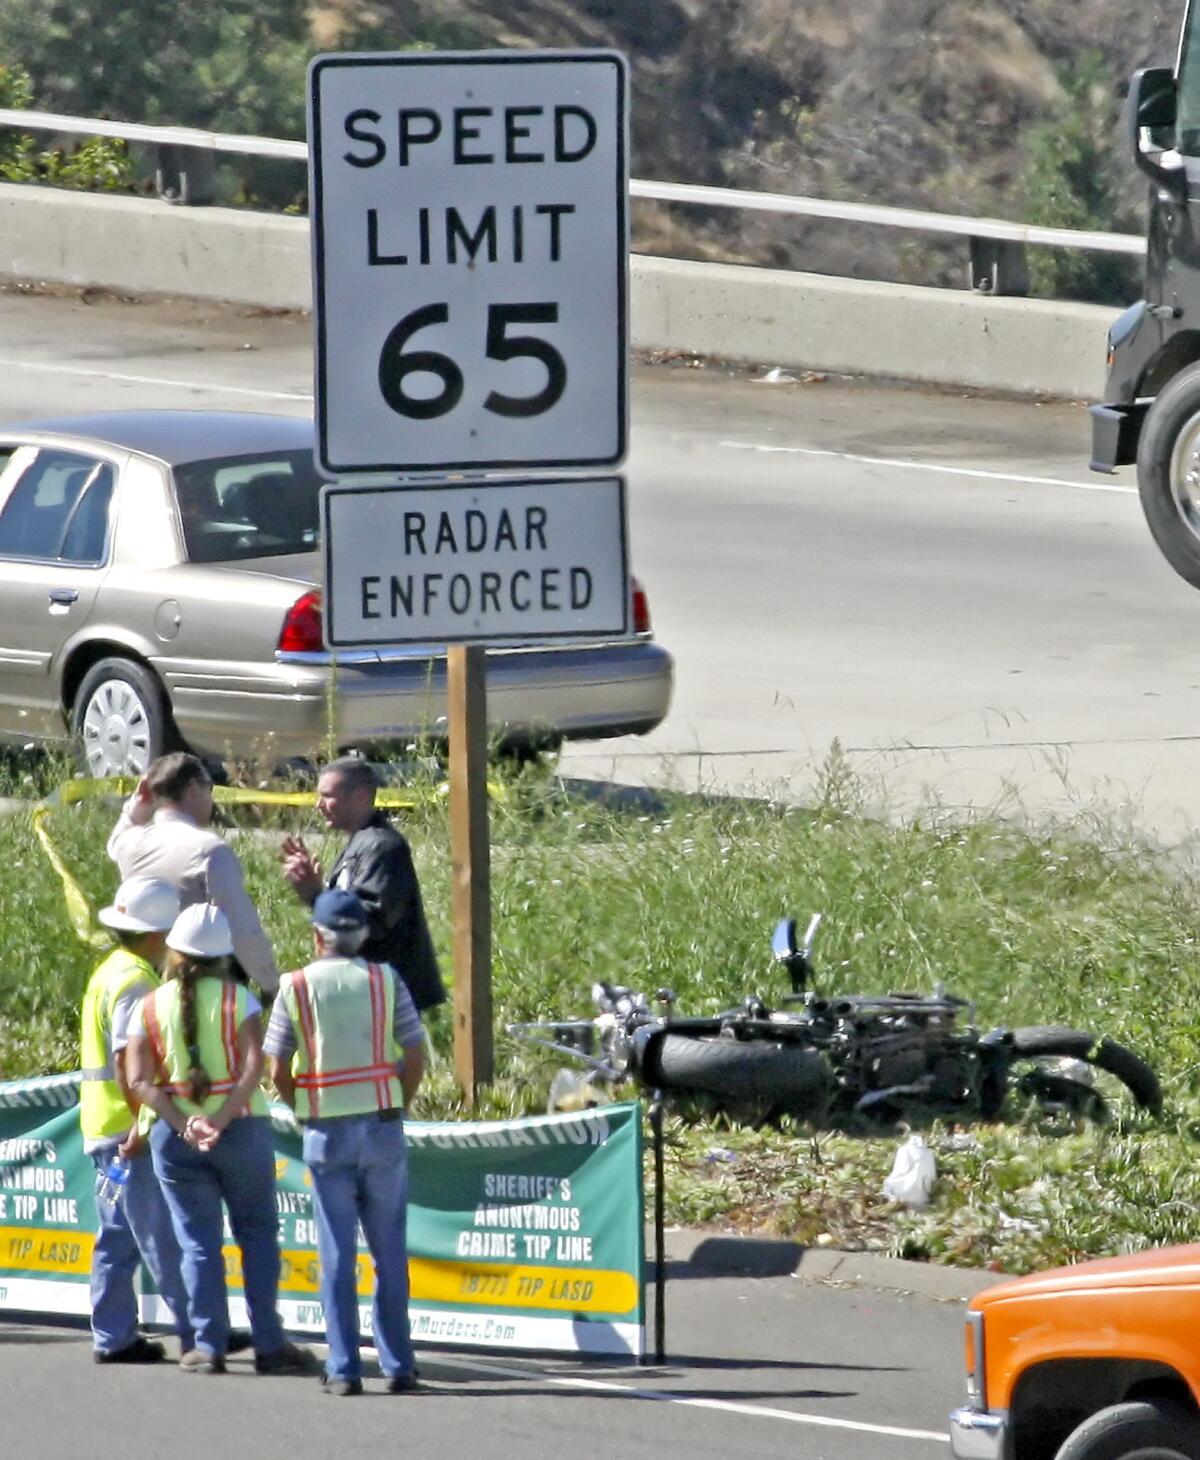 Emergency personnel talk near the wrecked motorcycle of man who was shot and killed early Wednesday morning, October 8, 2008. A reputed gang member accused of killing a Mongols Motorcycle Club member on the Glendale (2) Freeway in 2008 was sentenced on Wednesday, April 16, 2014, to life without the possibility of parole.